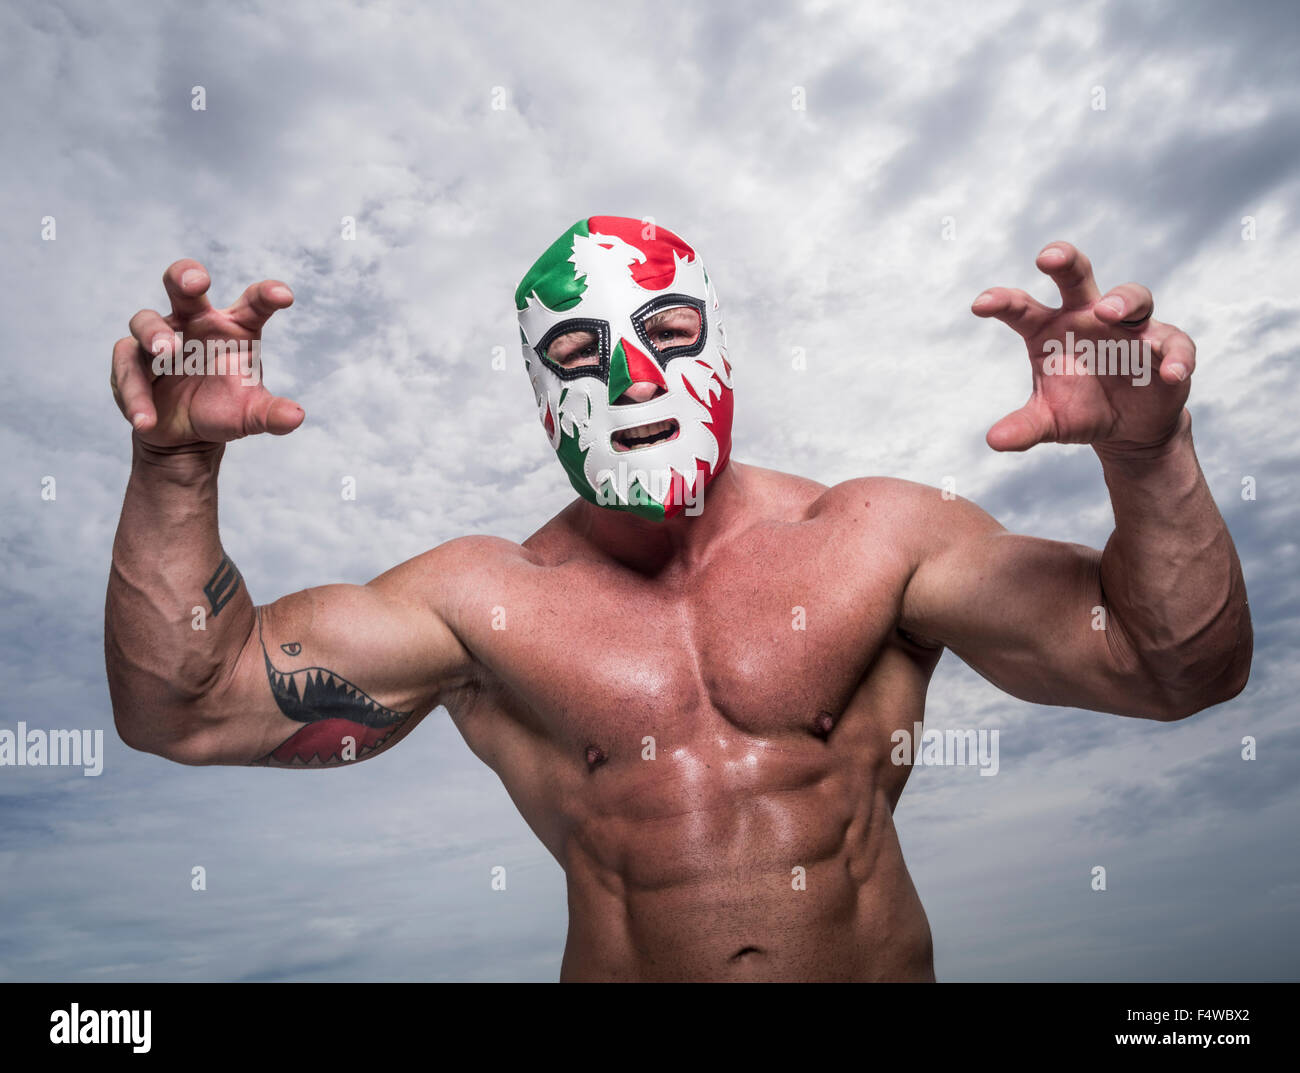 Large male muscular Wrestler with Mexican flag wrestling mask Stock Photo